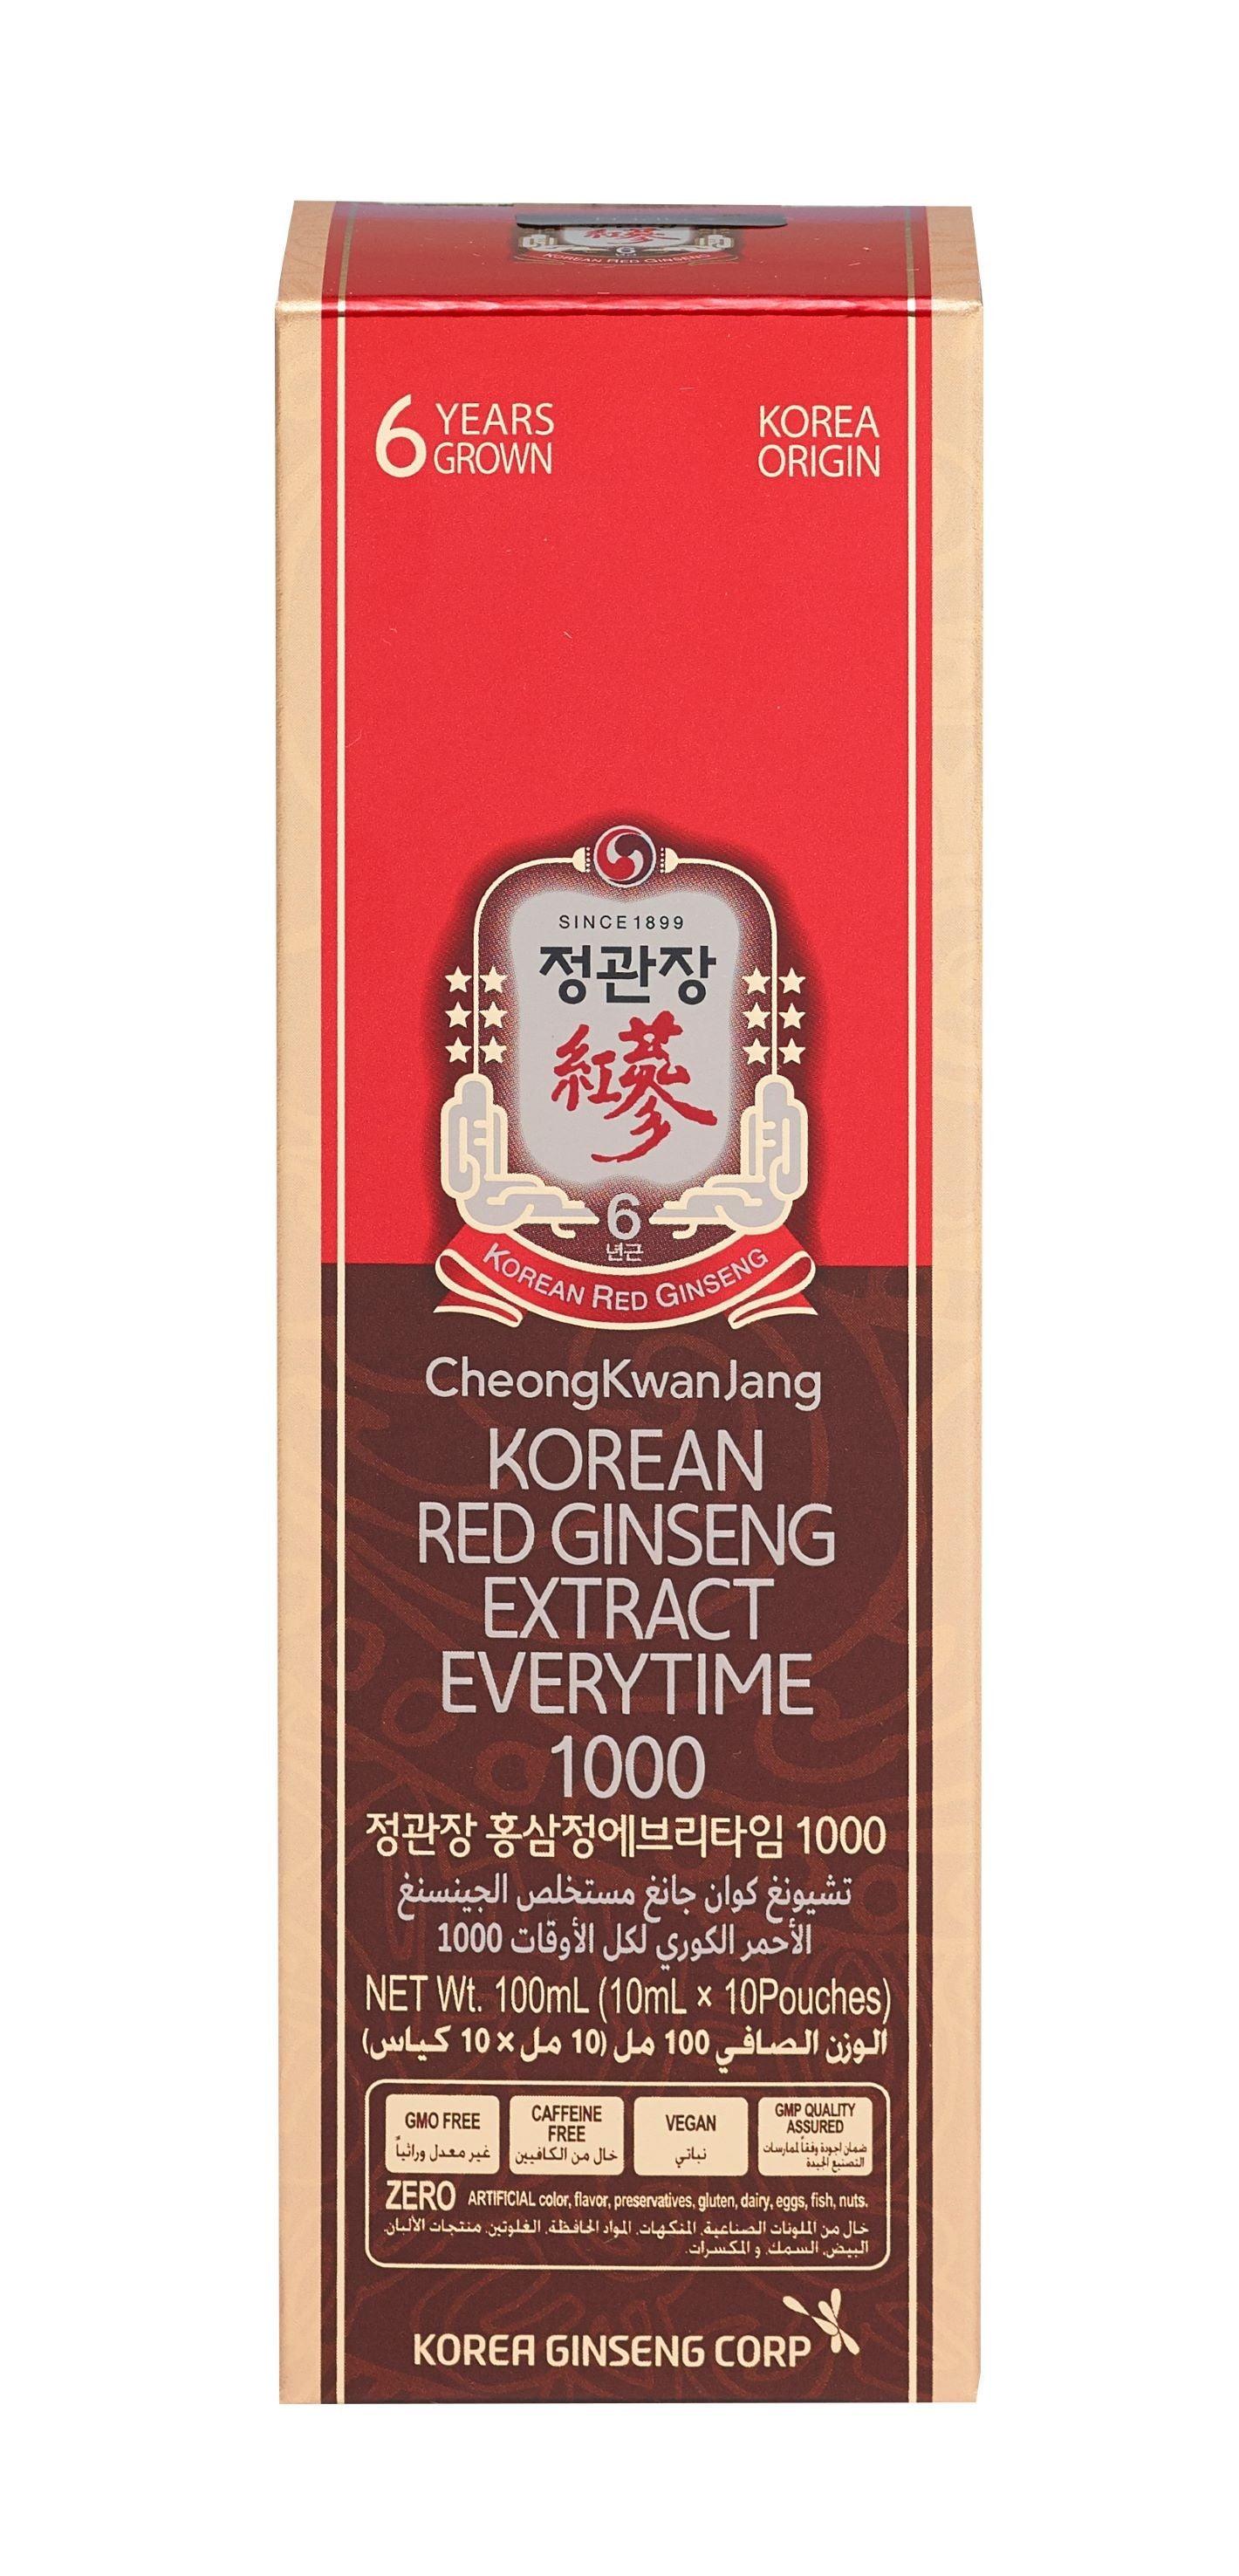 Add to Favourites Korean Red Ginseng Extract EveryTime 1000 - Wellness Shoppee